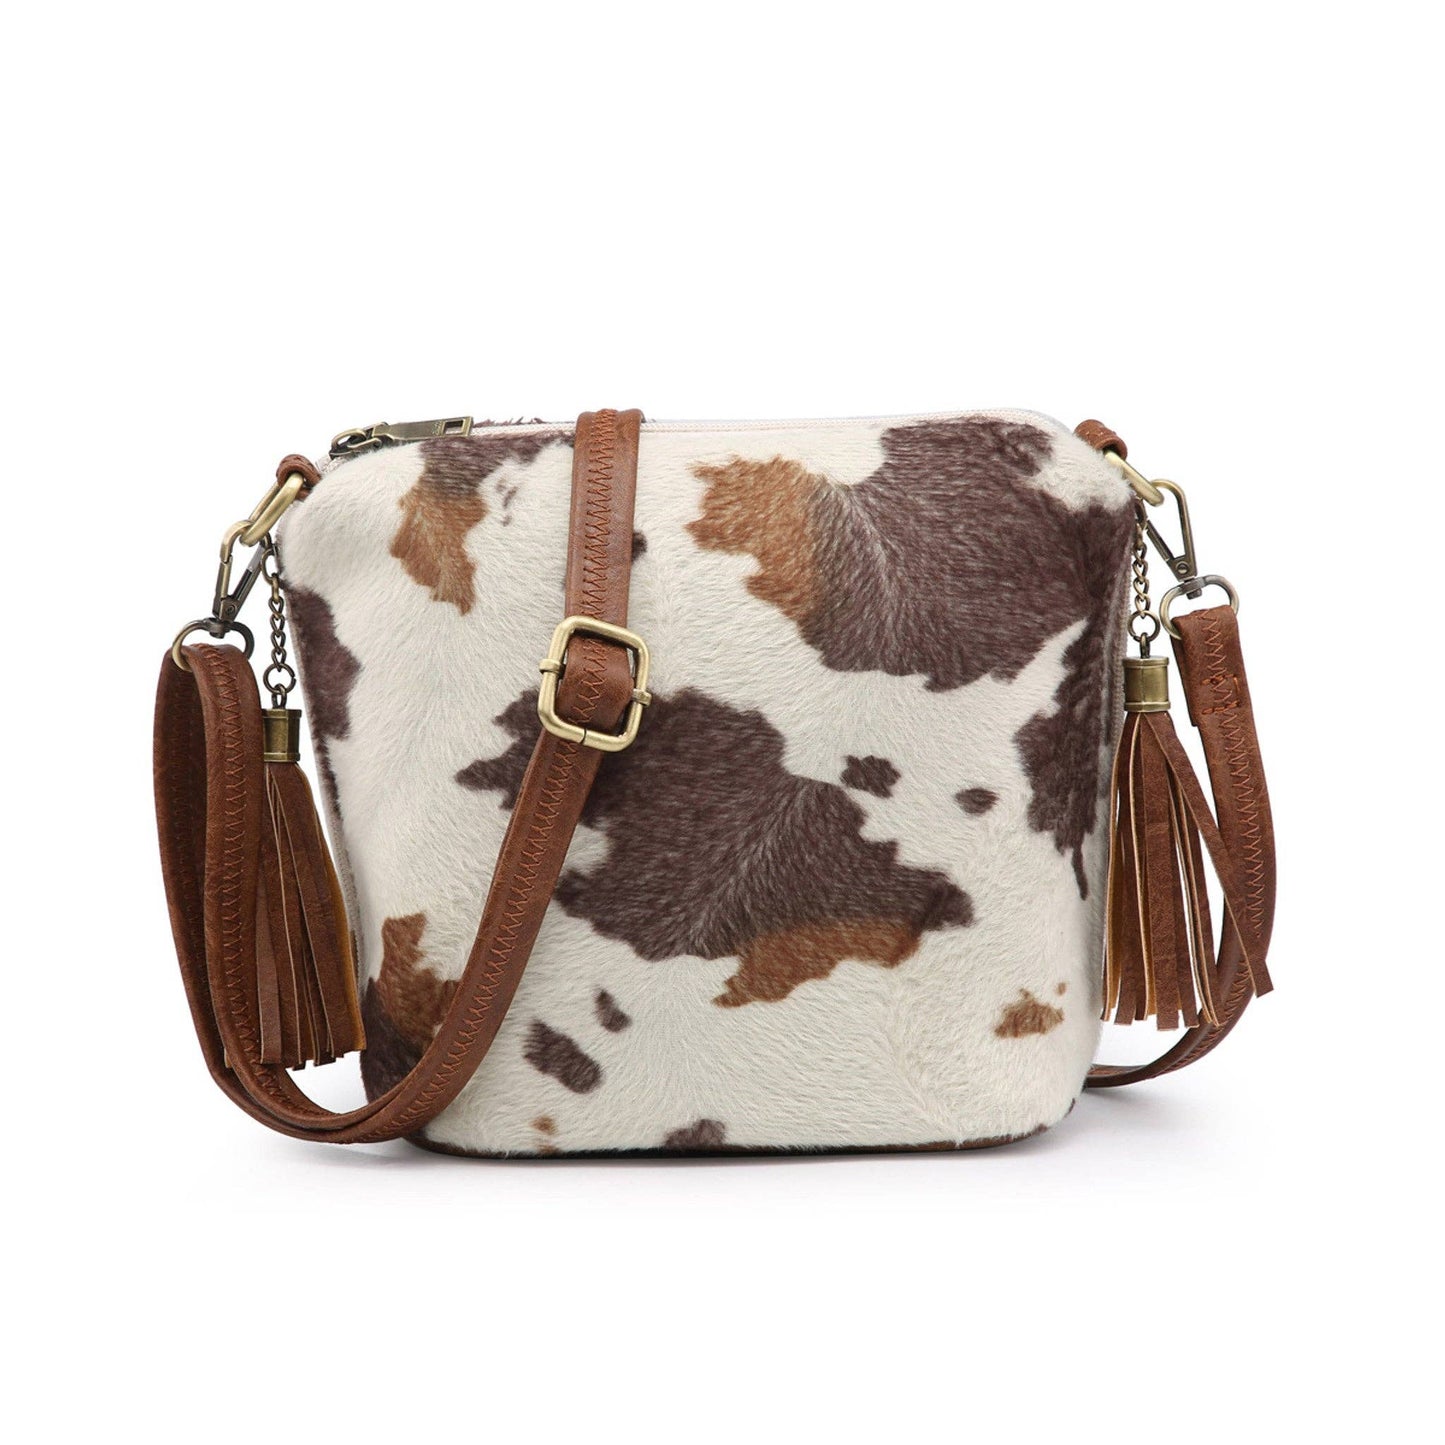 Concealed Carry Cow Print Bag